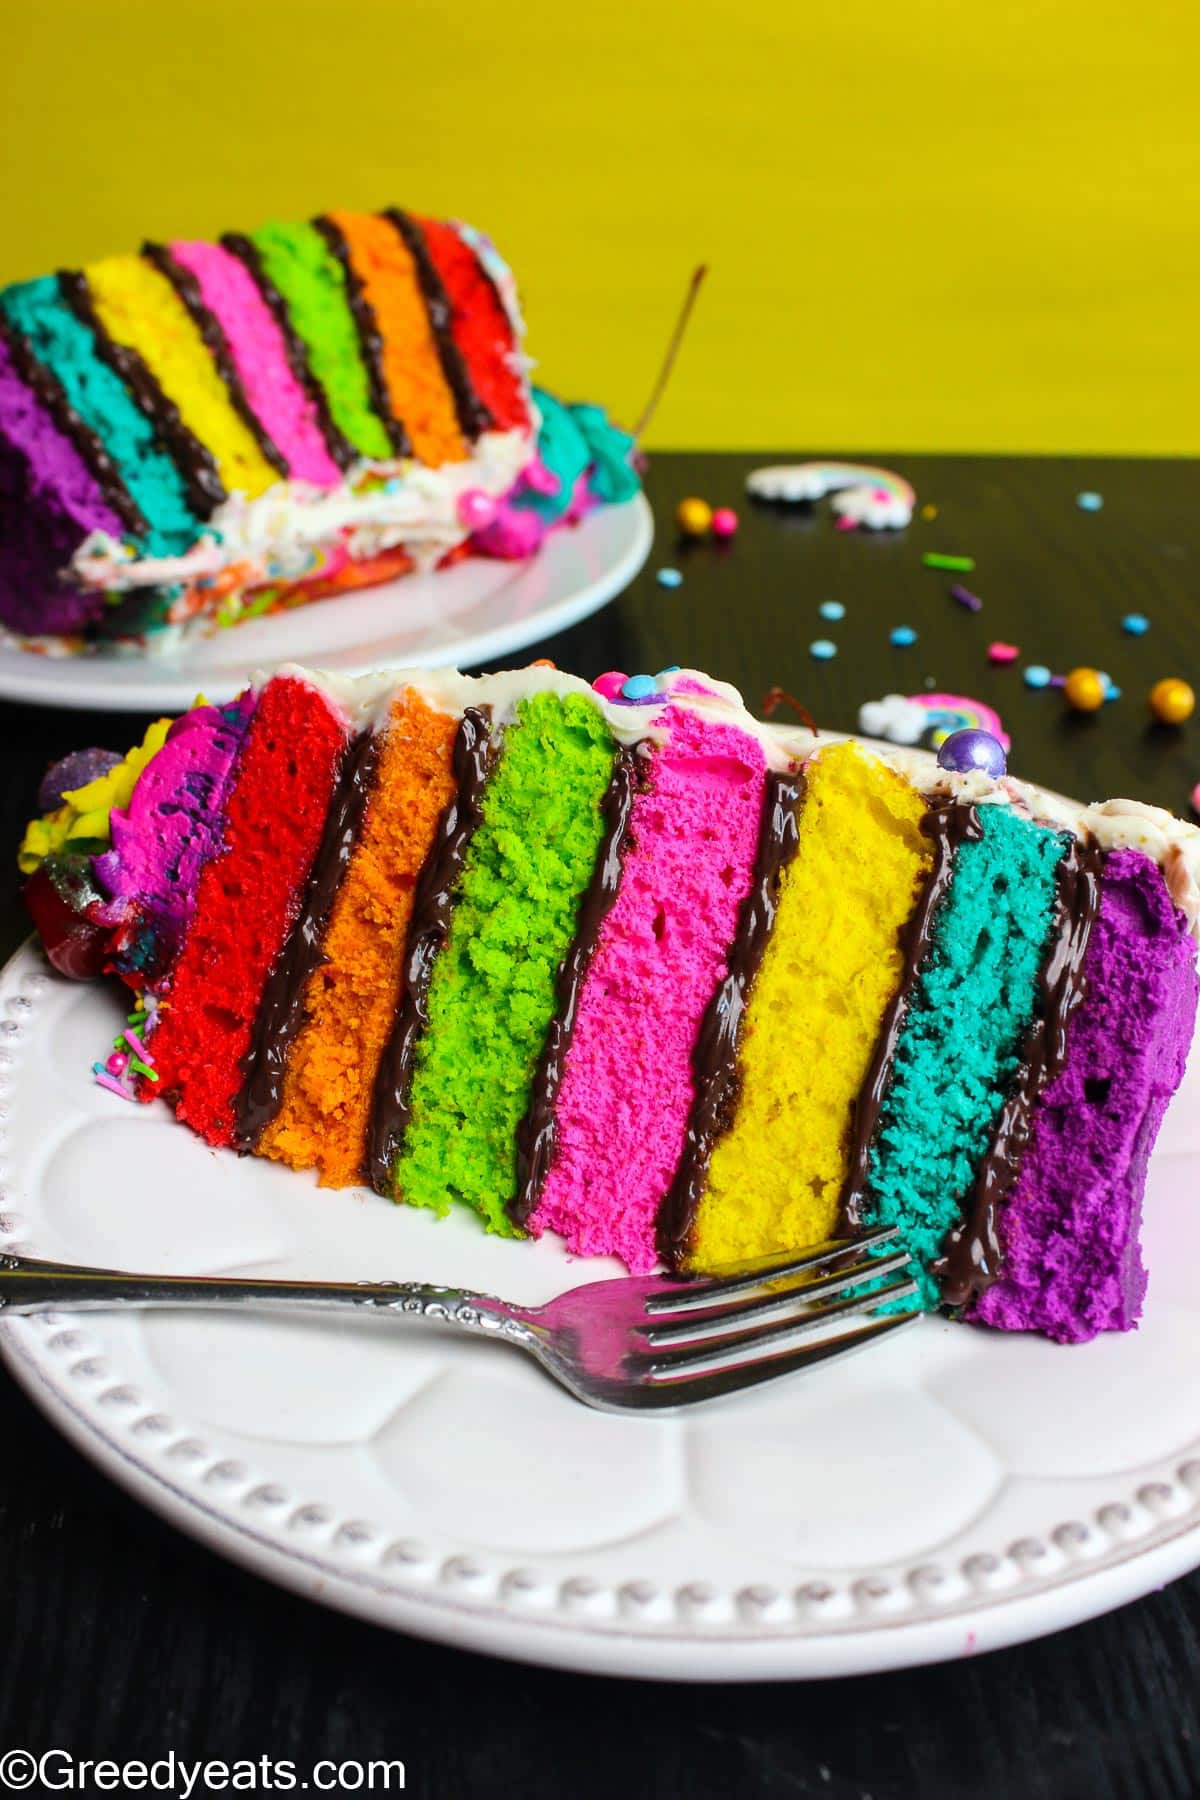 Moist and soft white velvet cake dressed up as Rainbow Cake layered with rich chocolate filling.